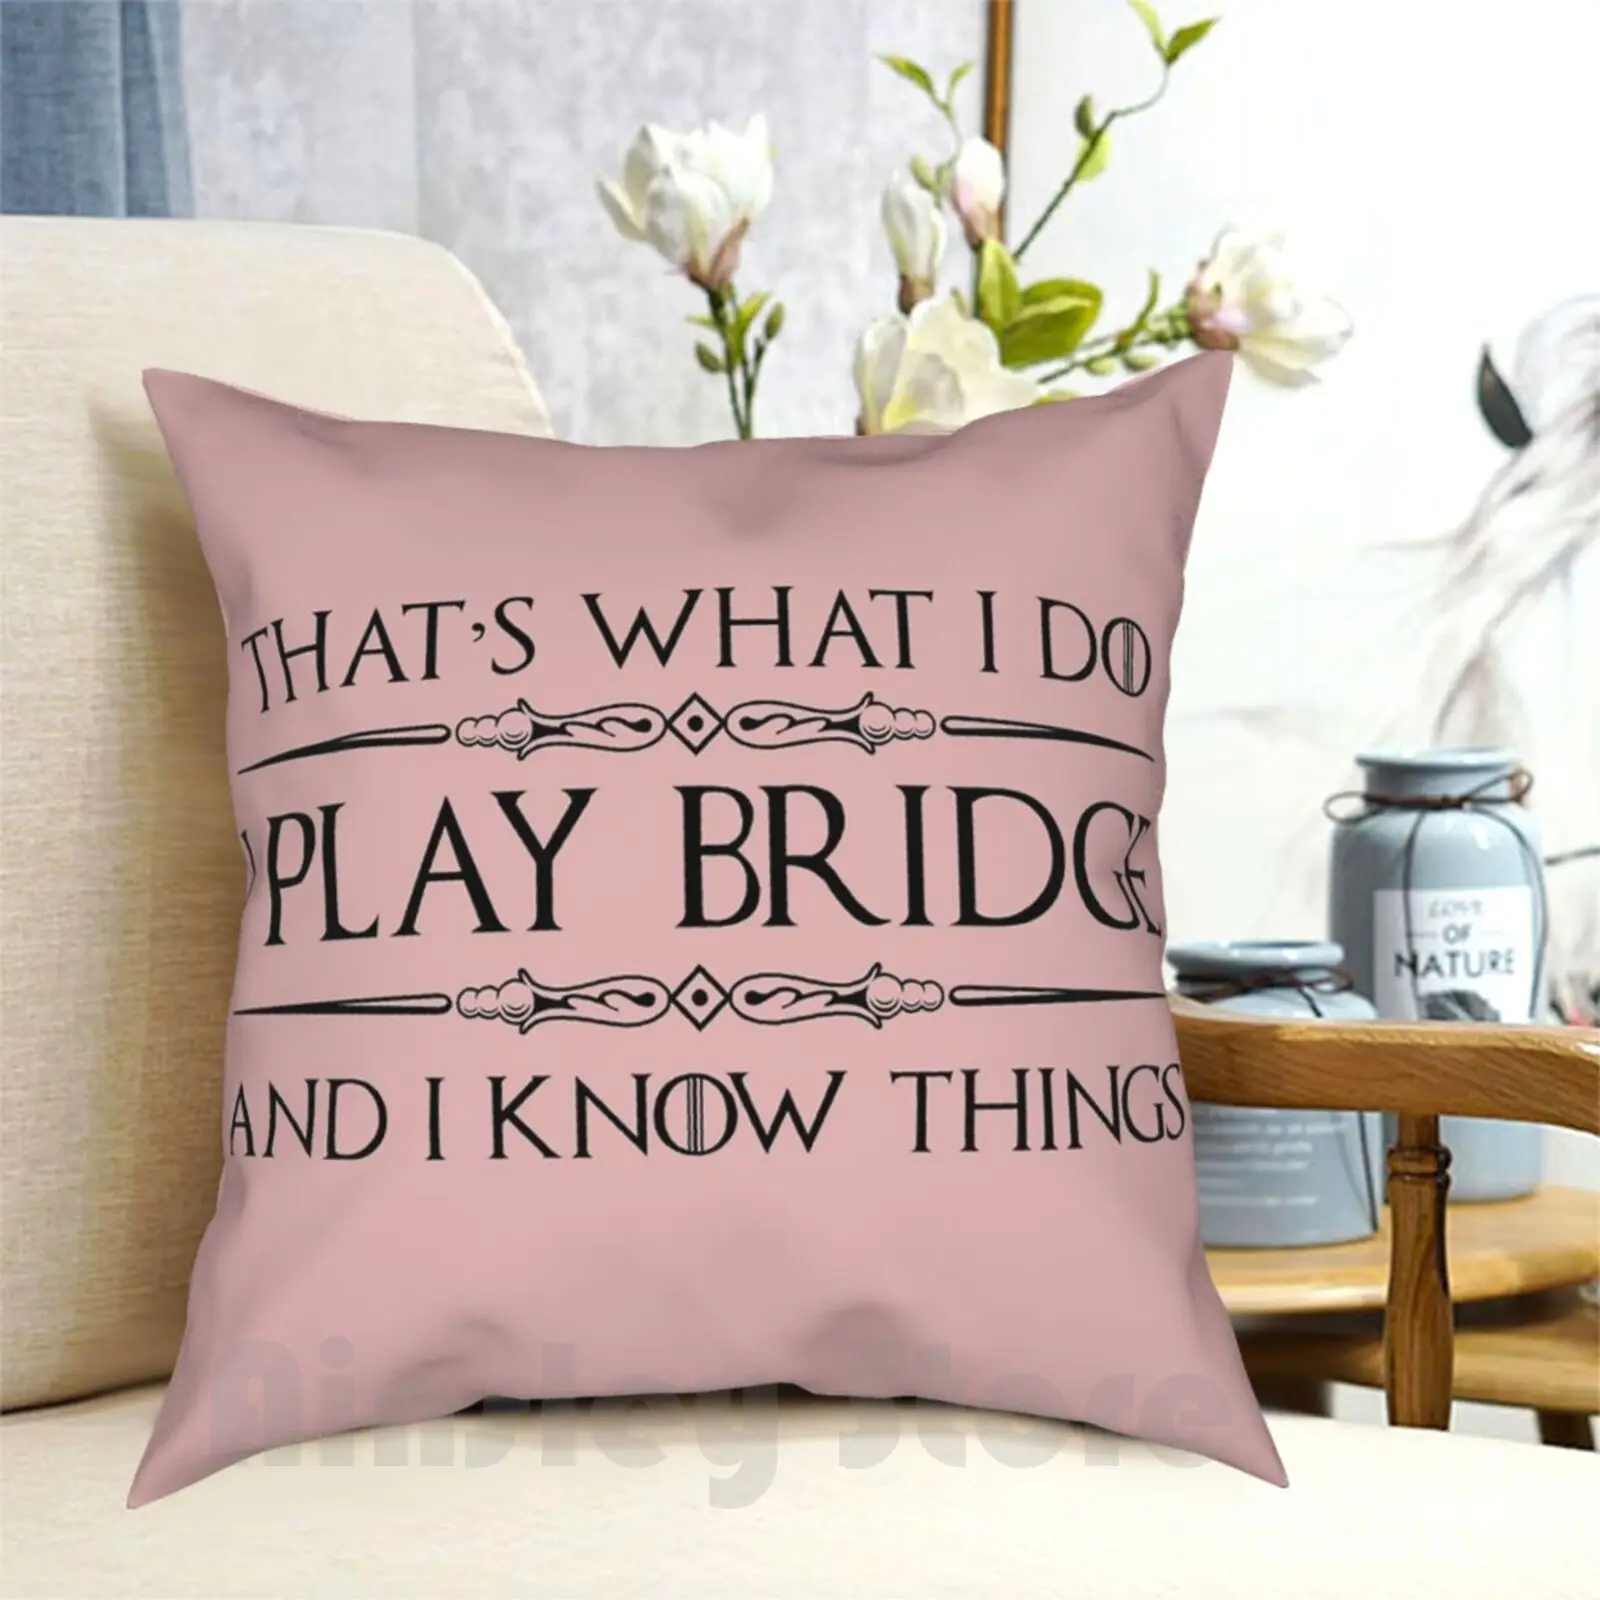 

Bridge Players Gifts-I Play Bridge & I Know Things Funny Gift Ideas For The Bridge Card Player & Lover Outdoor Hiking Backpack